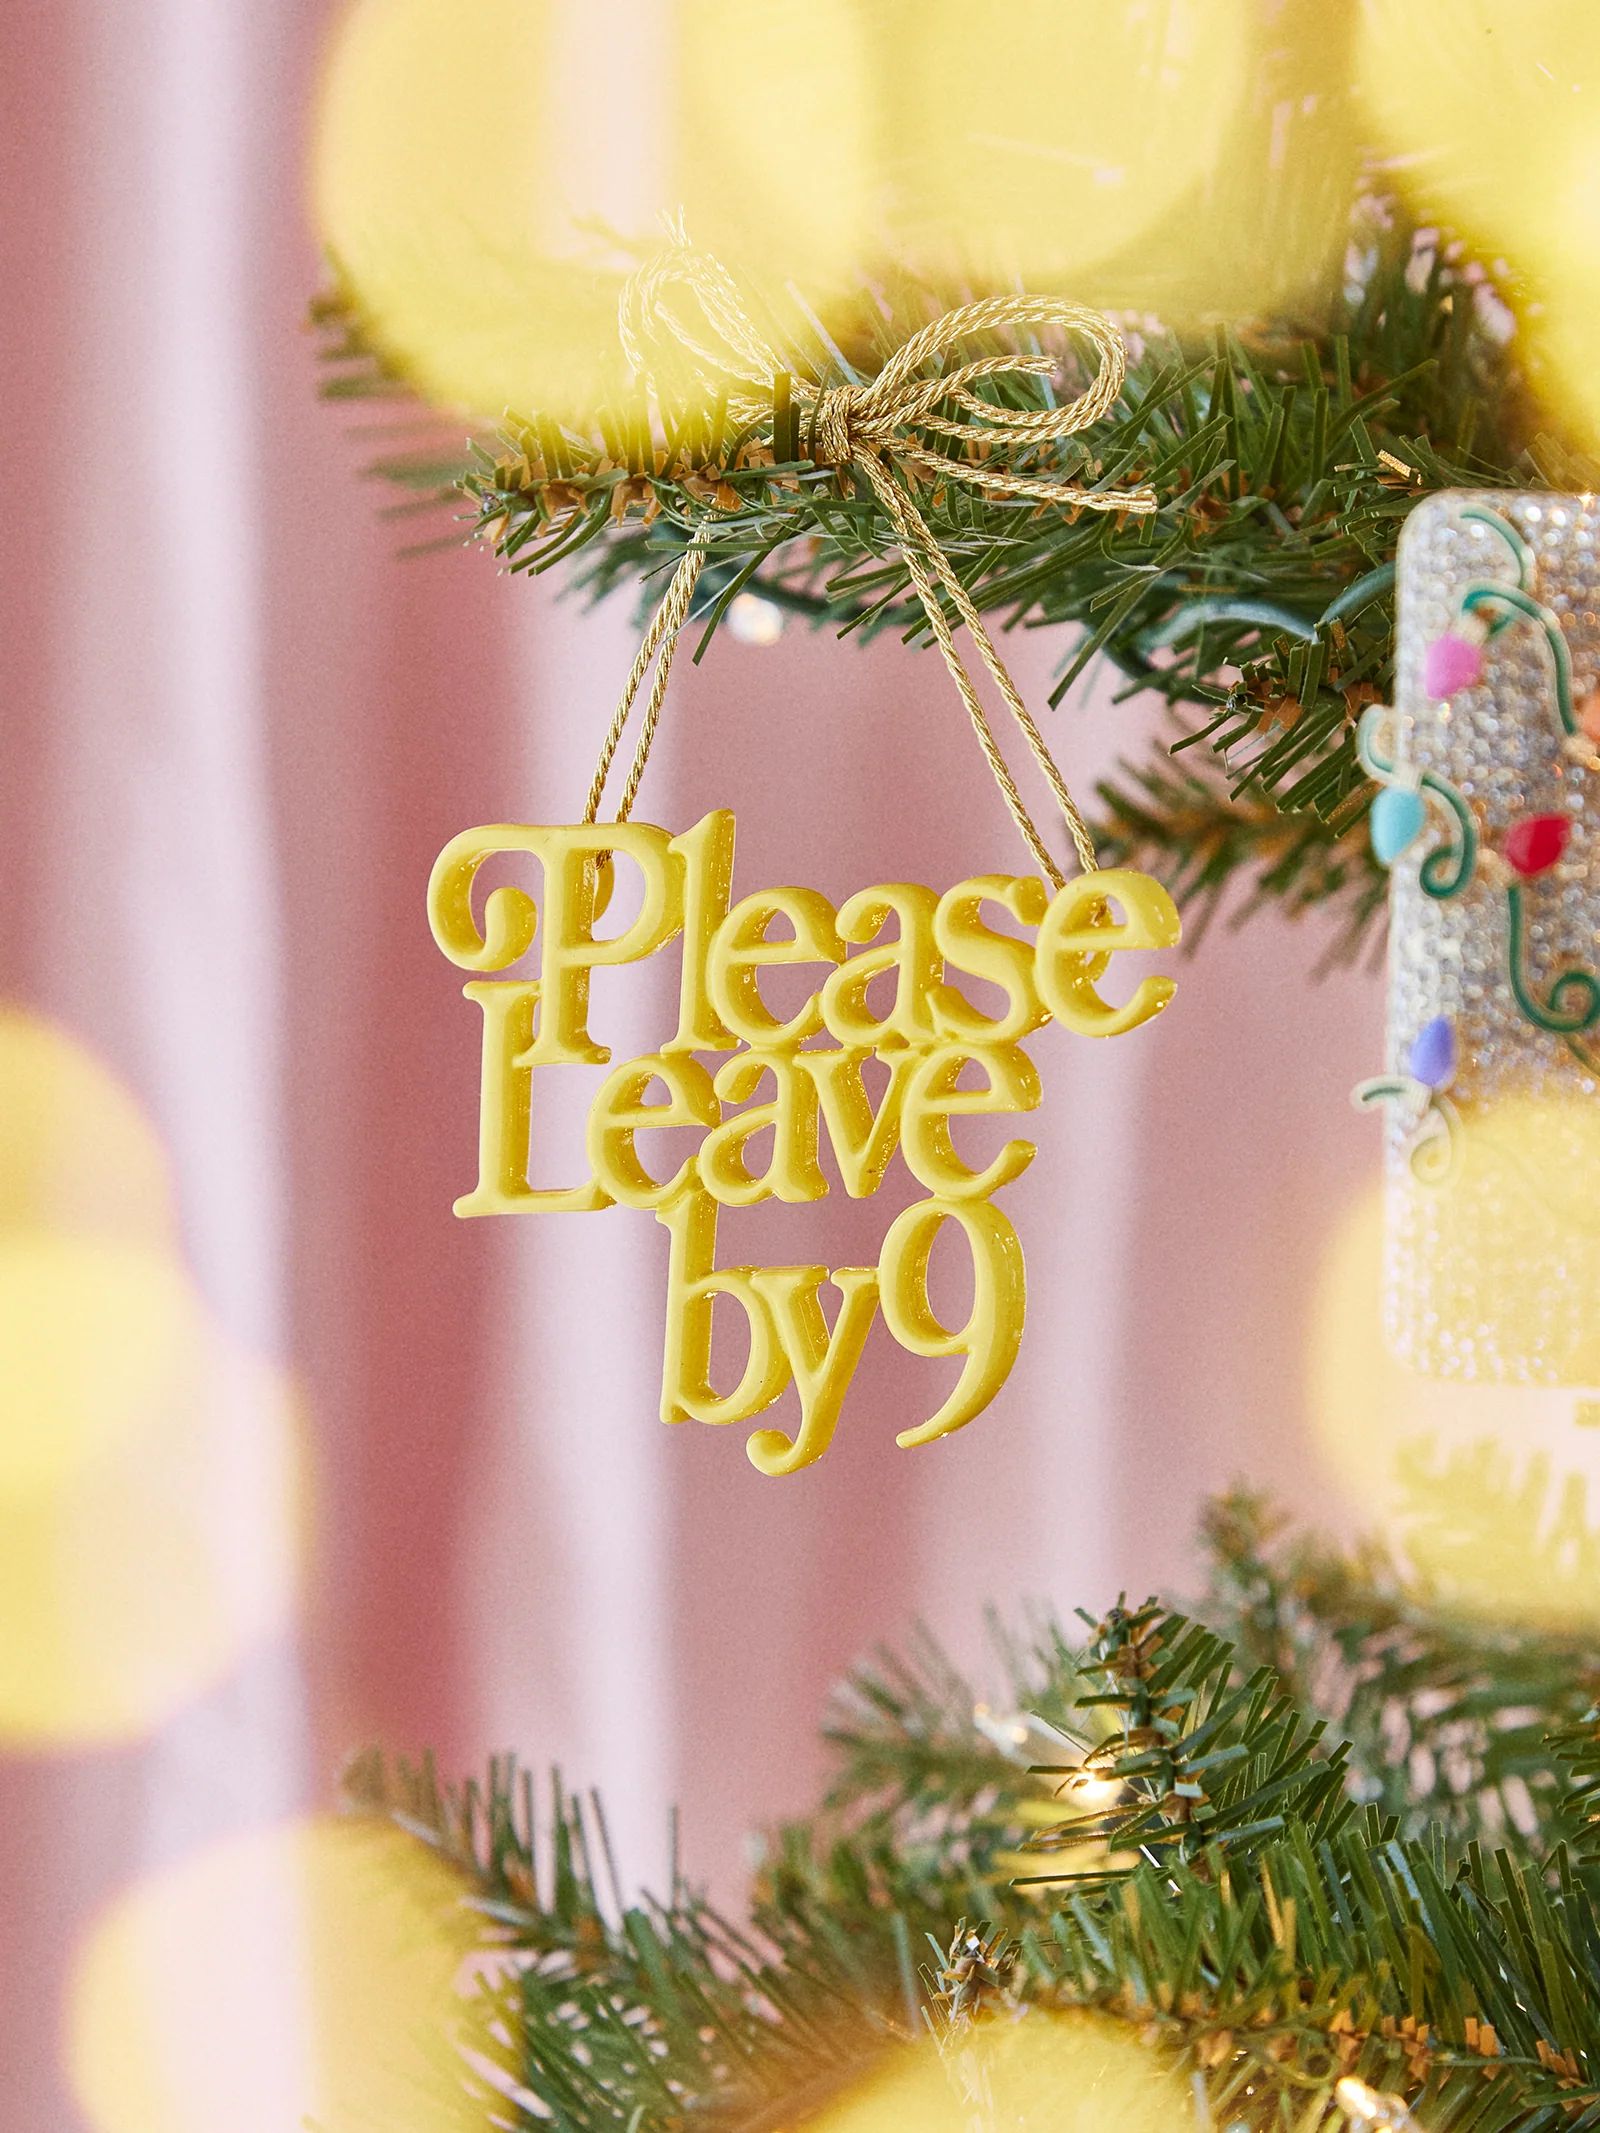 Say It All Ornament - Please Leave By 9 Ornament | BaubleBar (US)